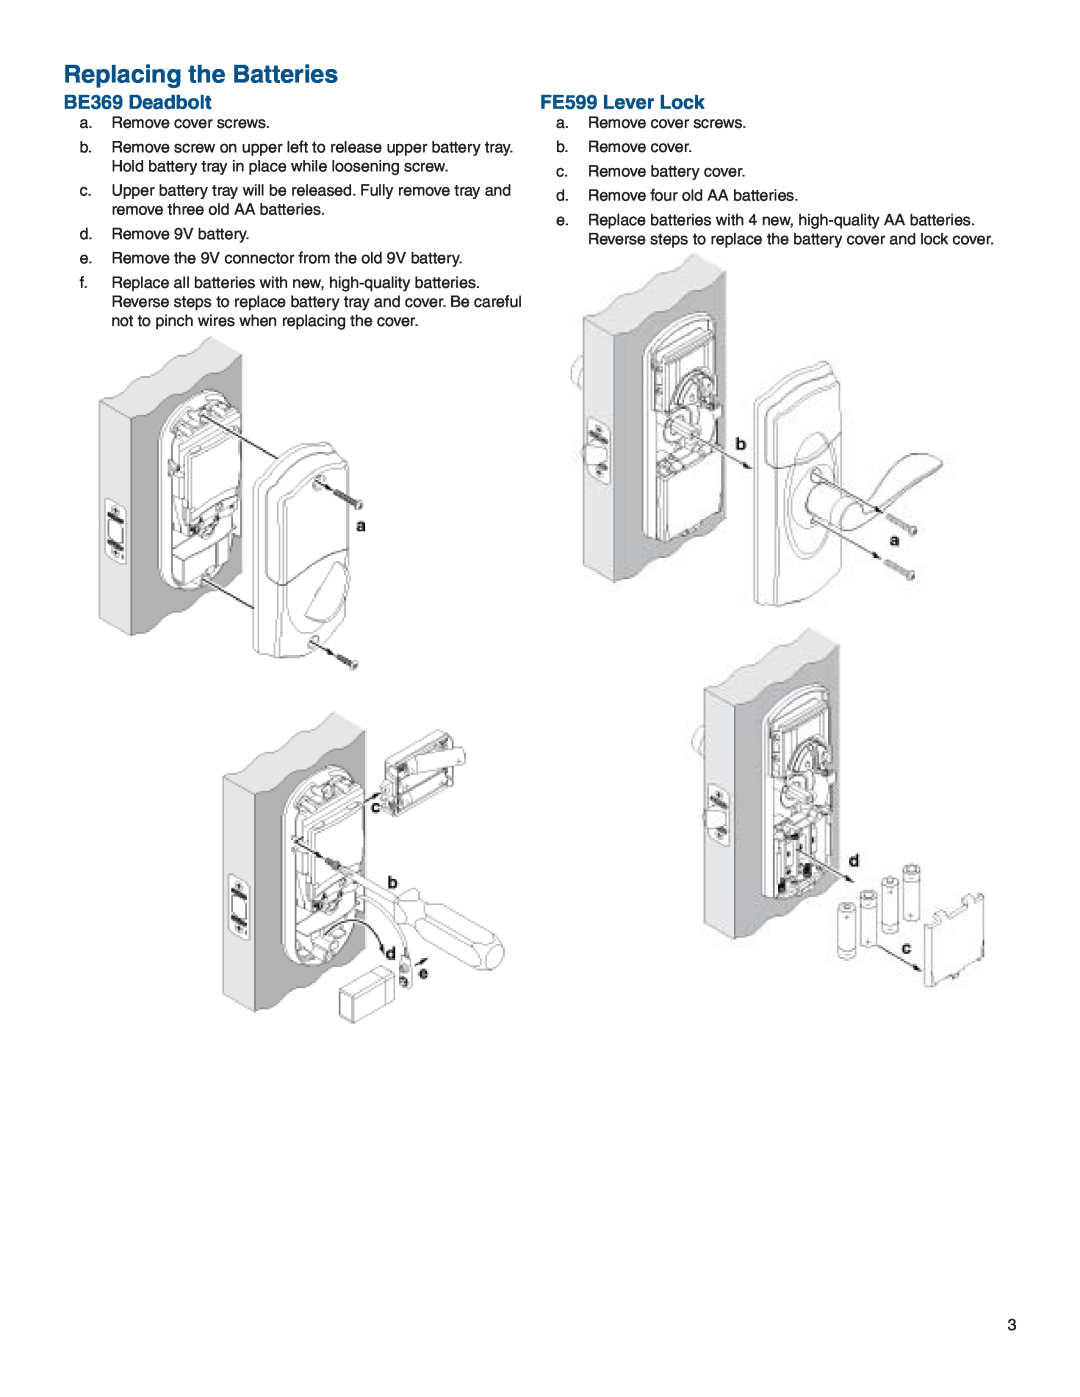 Sony manual Replacing the Batteries, BE369 Deadbolt, FE599 Lever Lock 